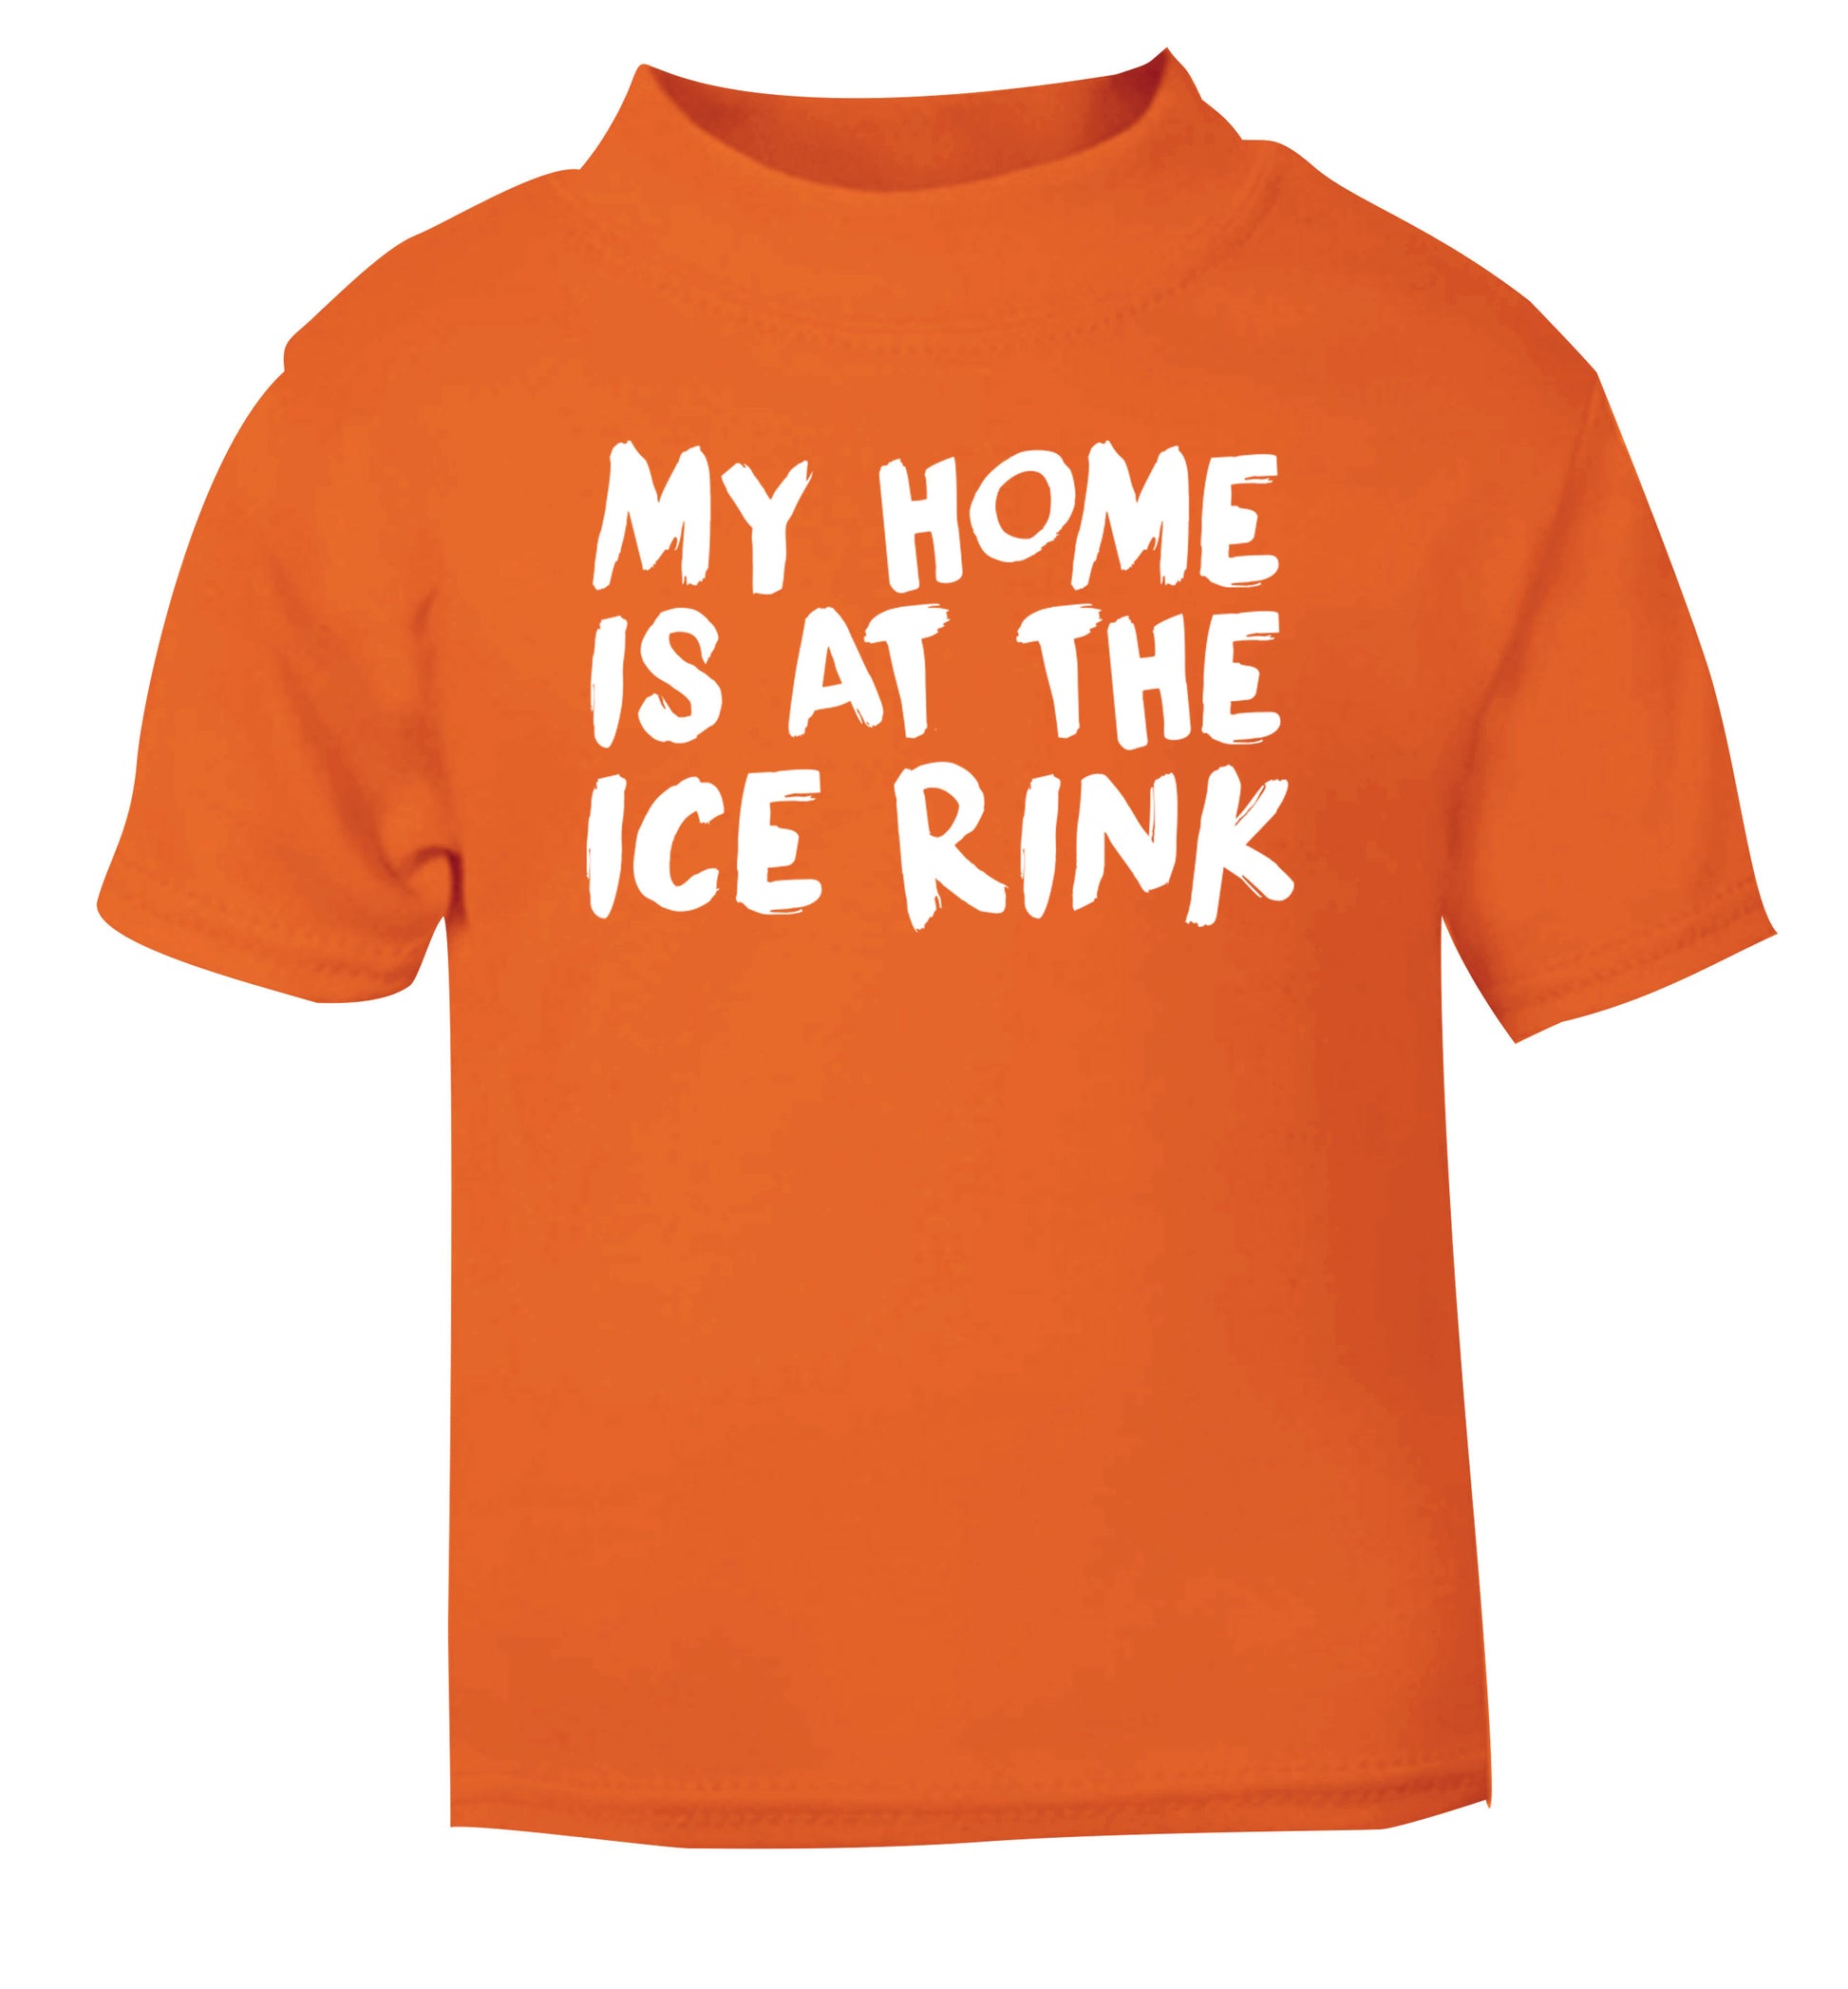 My home is at the ice rink orange Baby Toddler Tshirt 2 Years